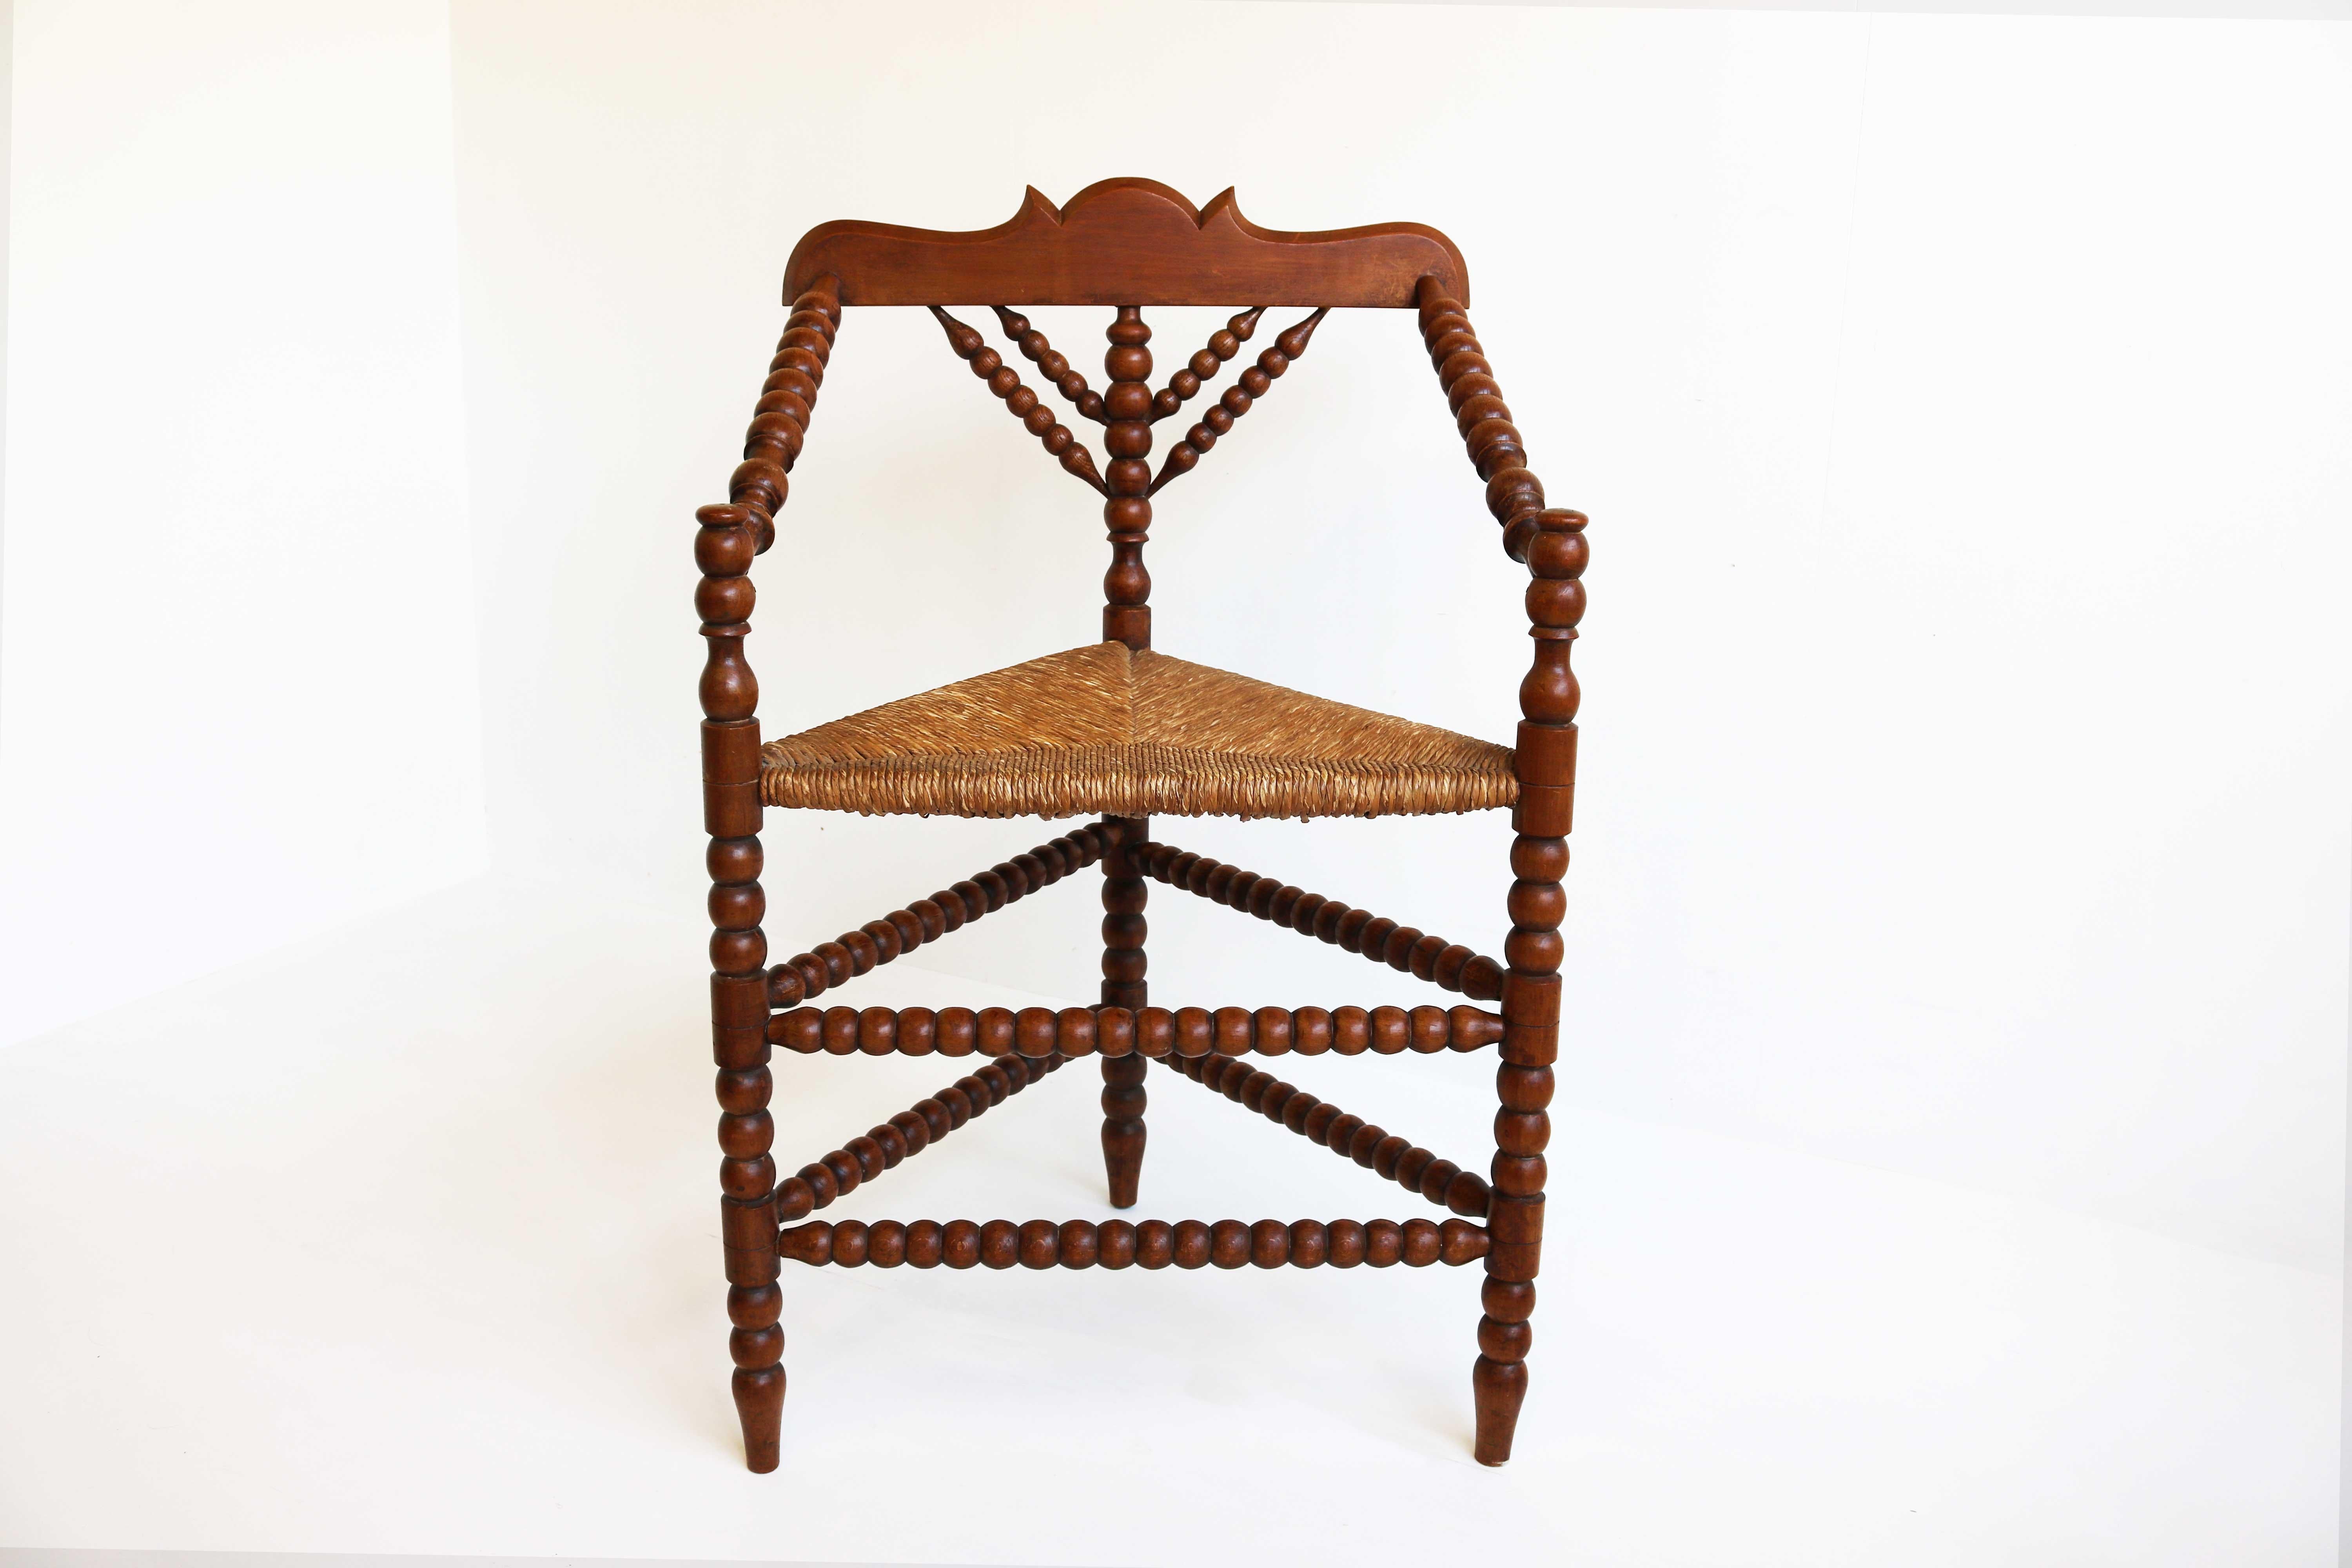 Late 19th century bobbin turned wood armchair with rush seat, ca 1900
Manufactured in The Netherlands.
Beautiful antique bobbin/ knitting chair with three legs.
This old Dutch chair with three legs is called a knitting chair.
Because of the